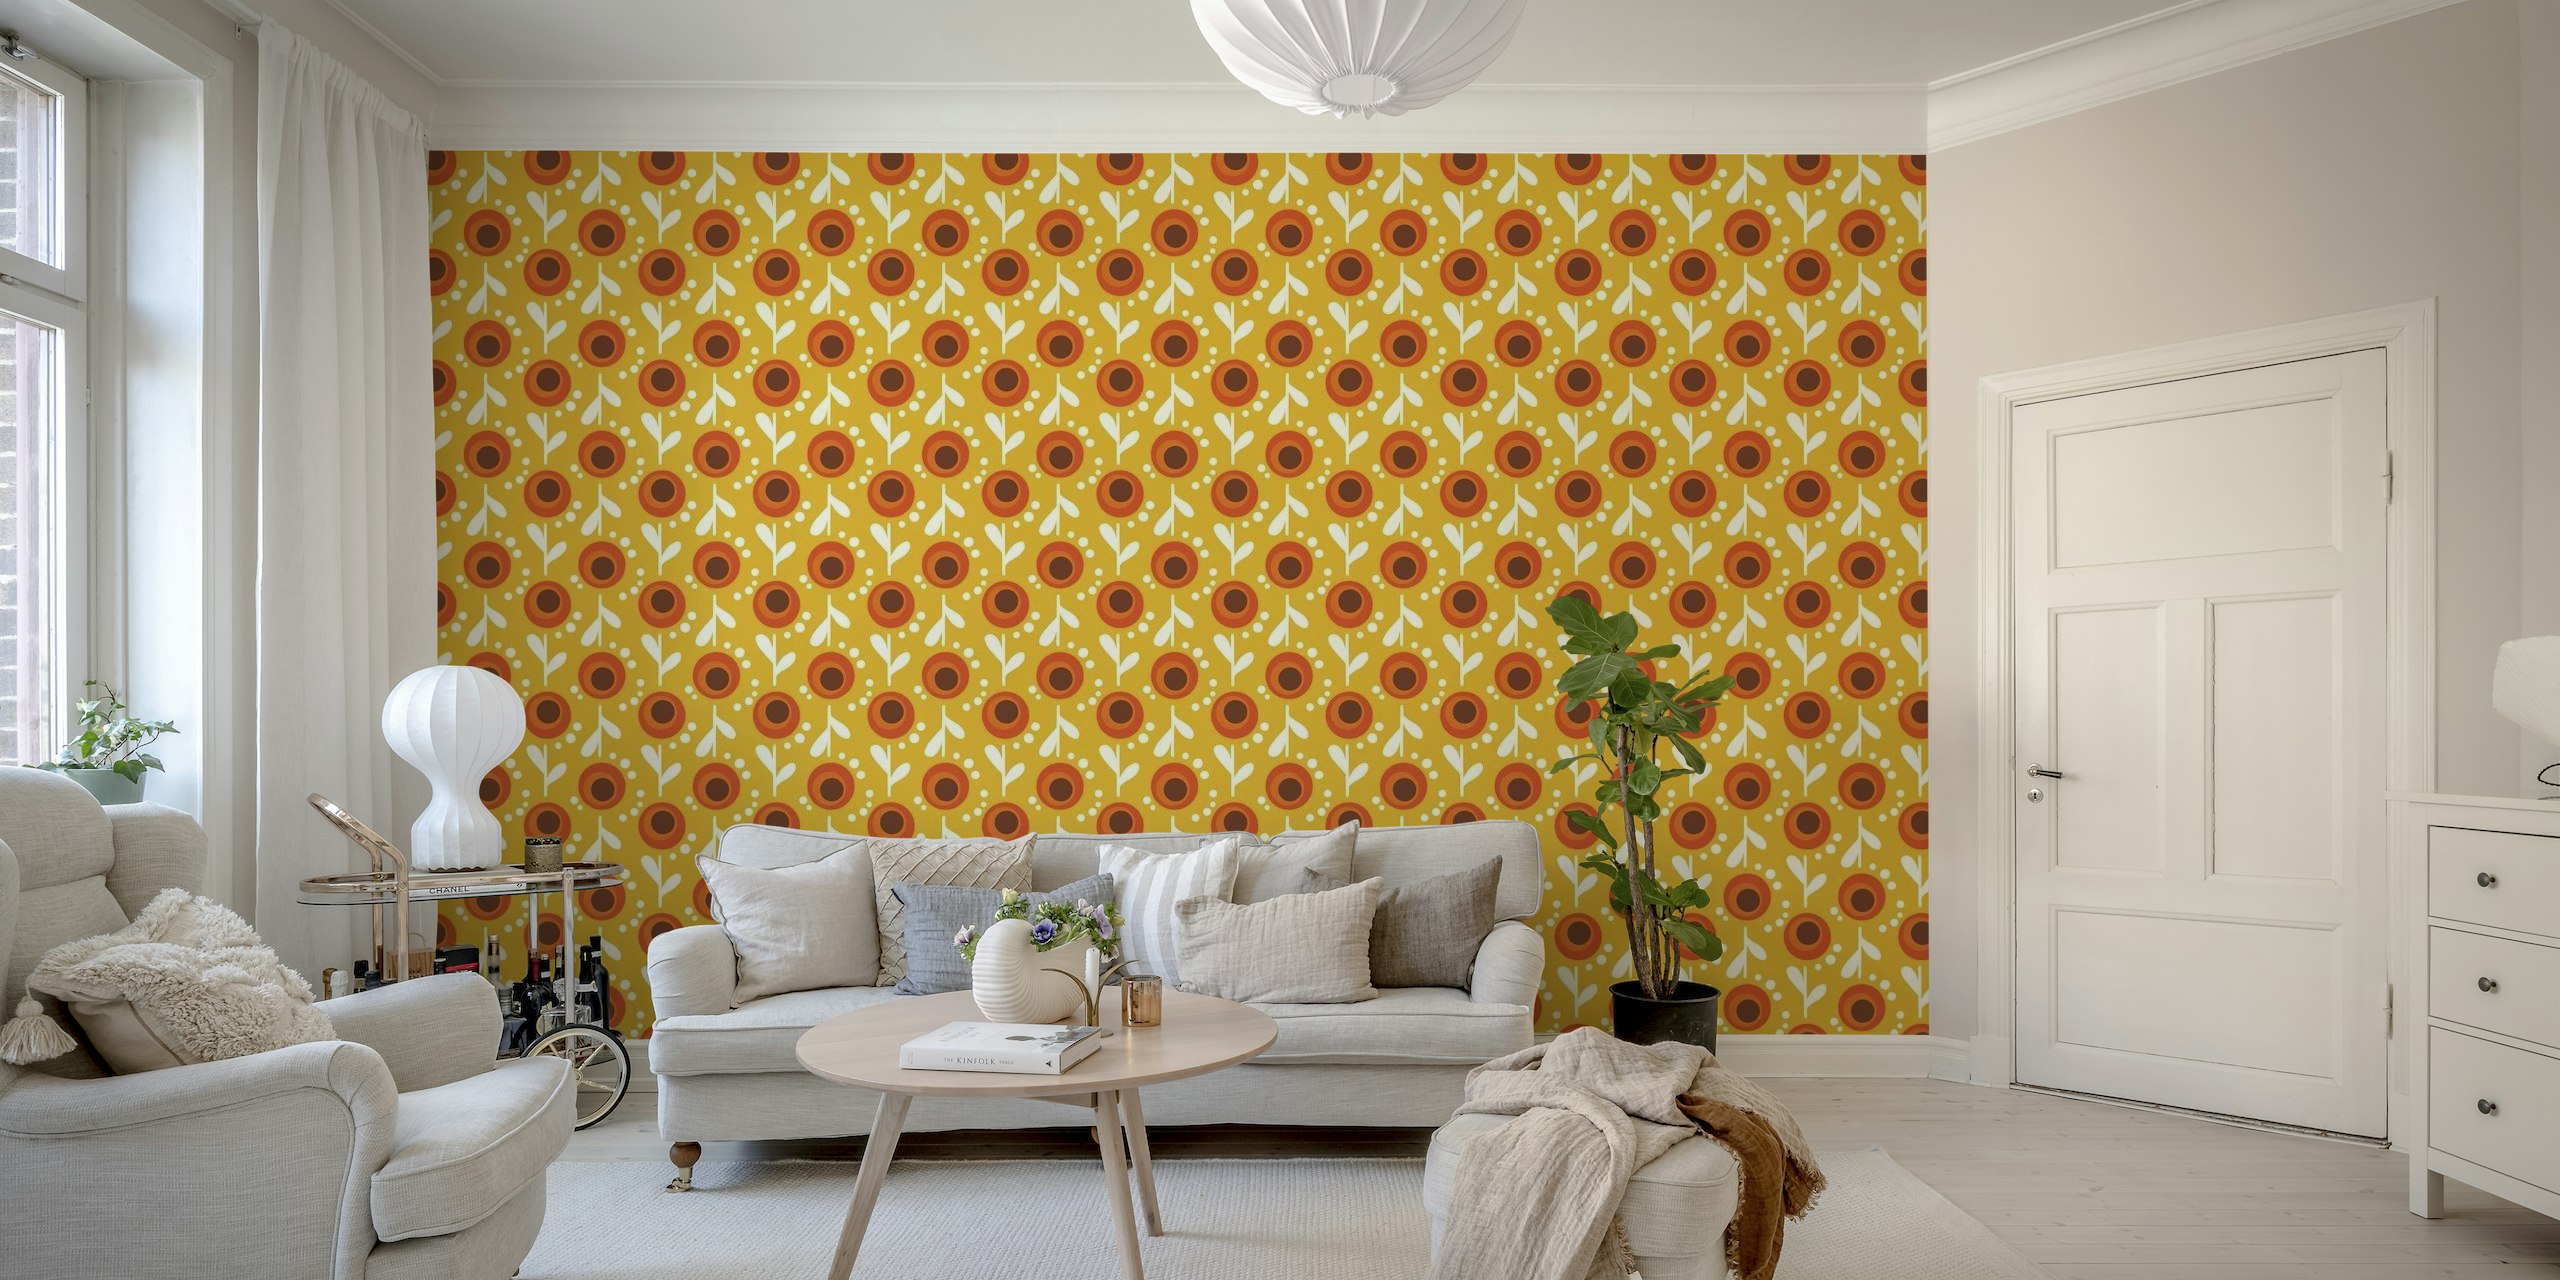 Vintage-inspired 'Retro Orange Floral' wall mural with vibrant orange flowers and white accents on a yellow background.